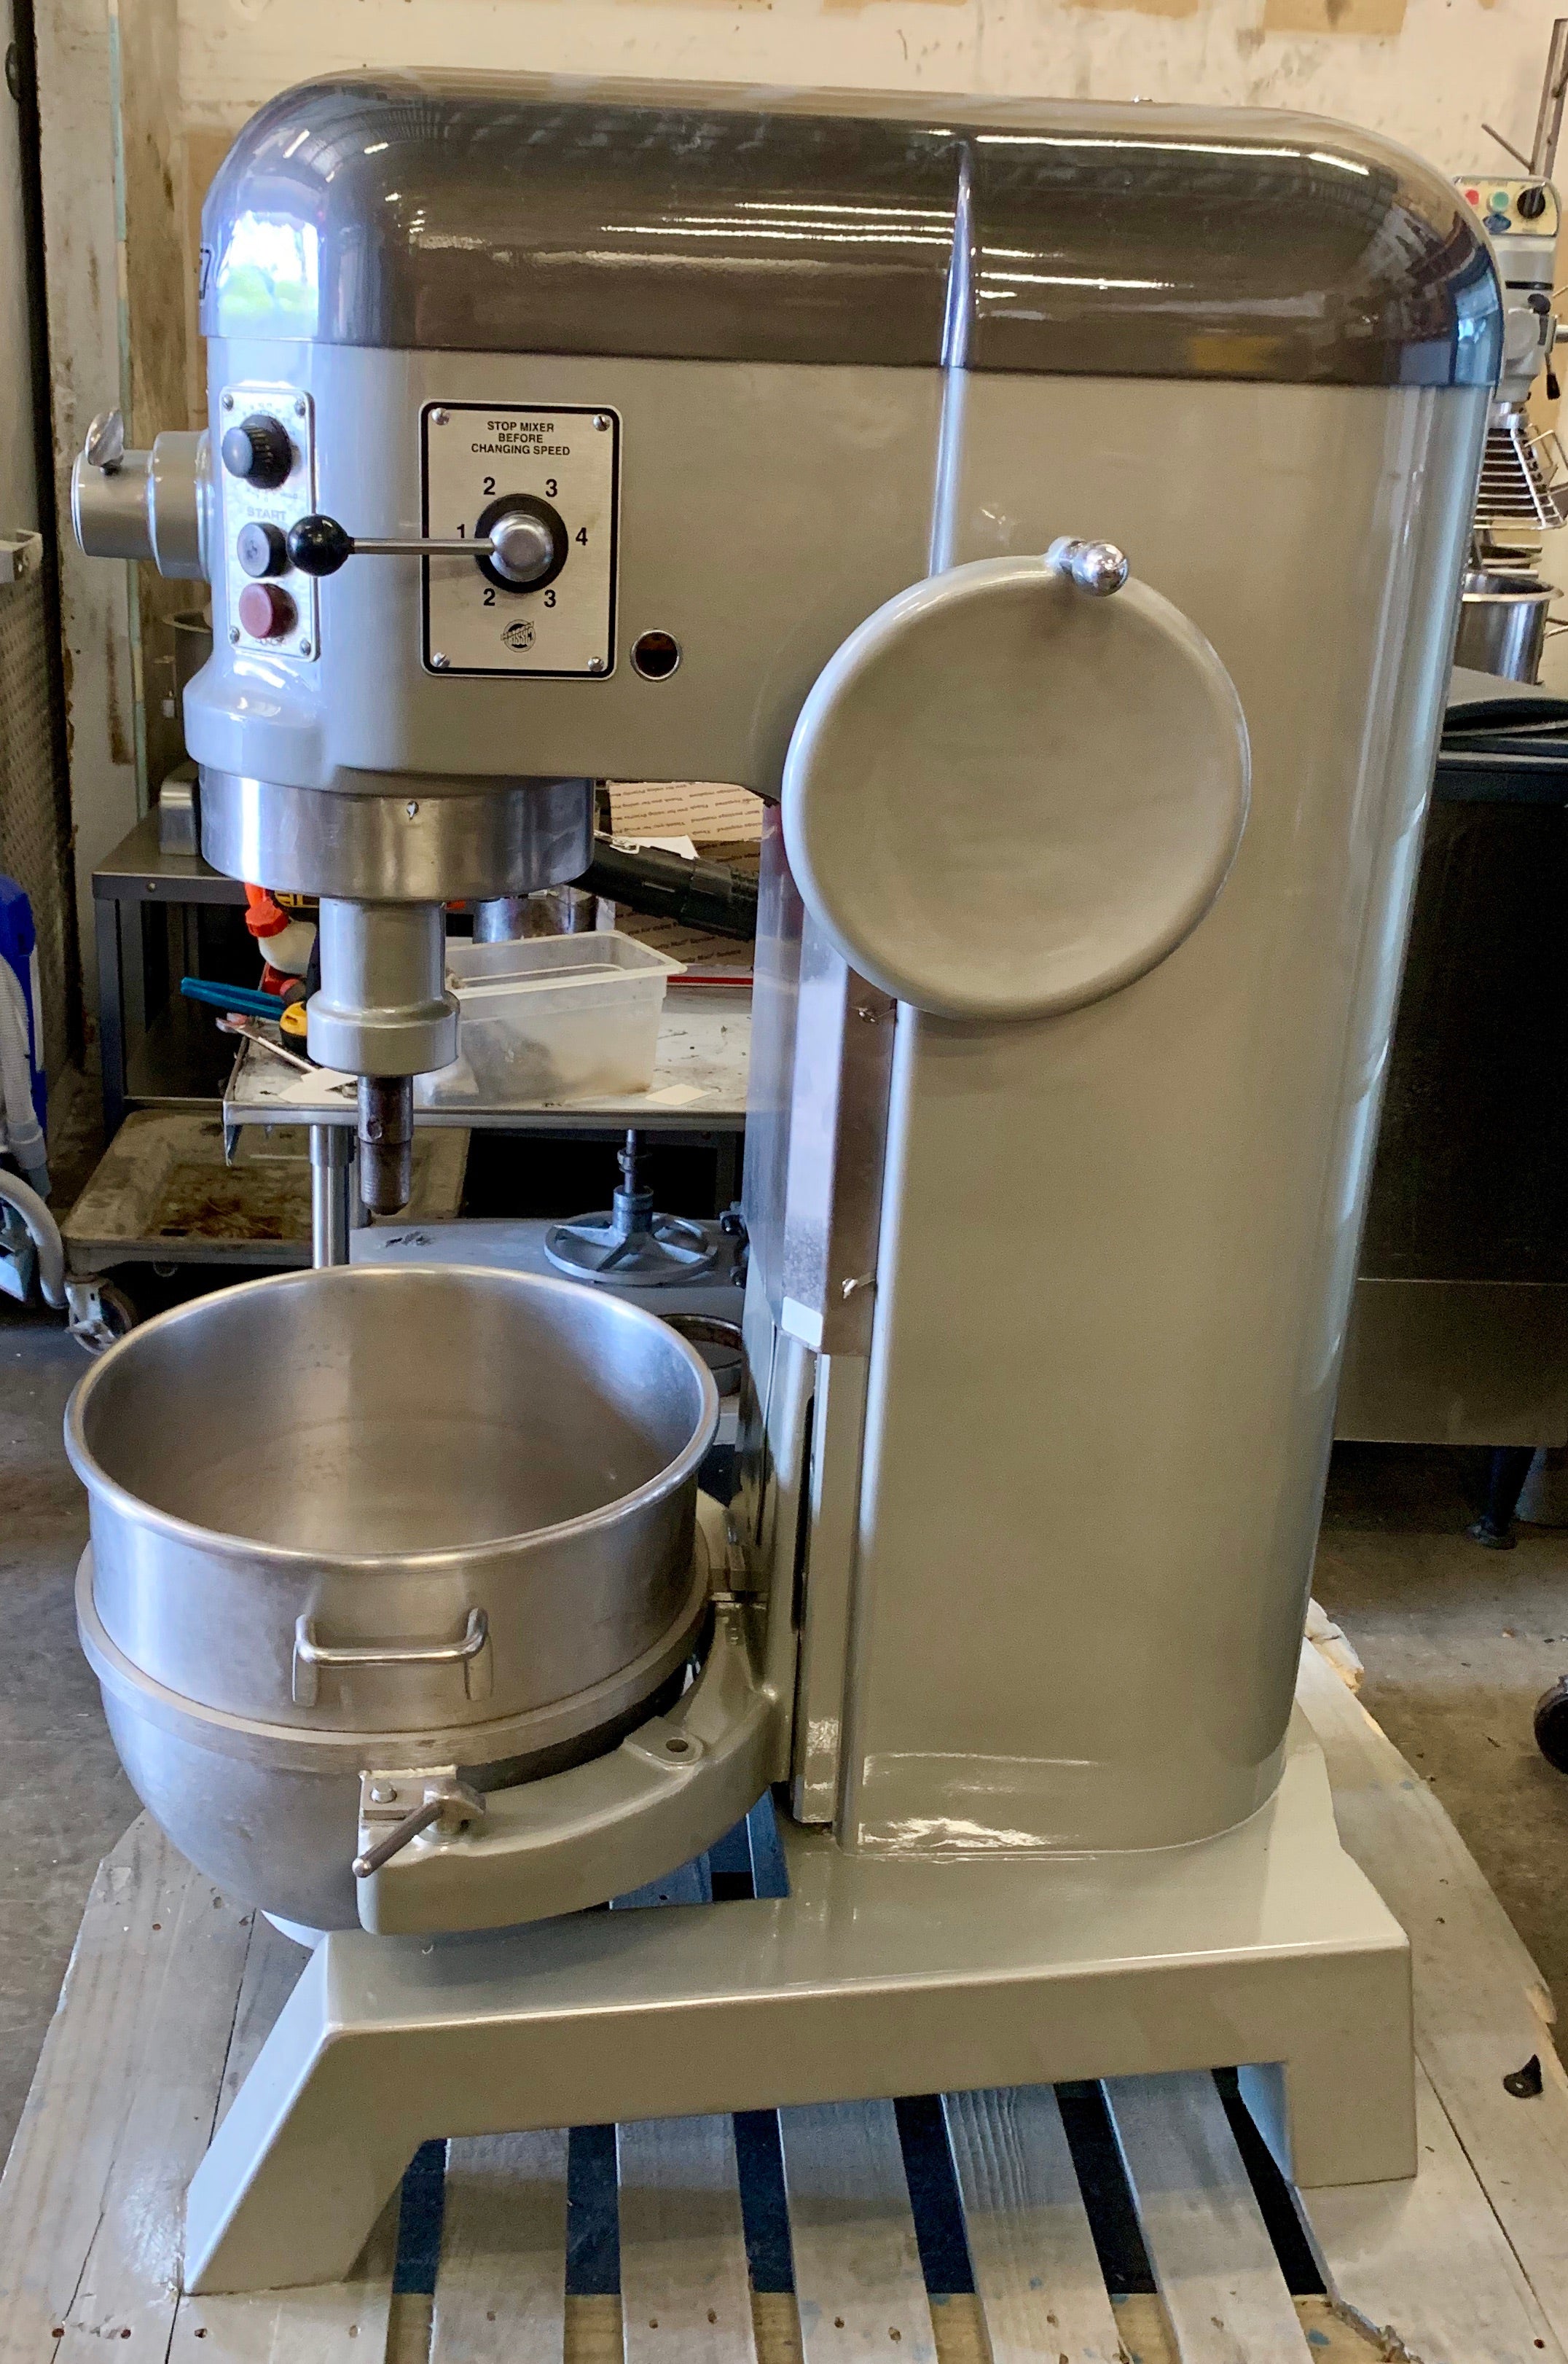 Hobart 60 Qt mixer 2 HP 3 phase comes with SS bowl and one attachment